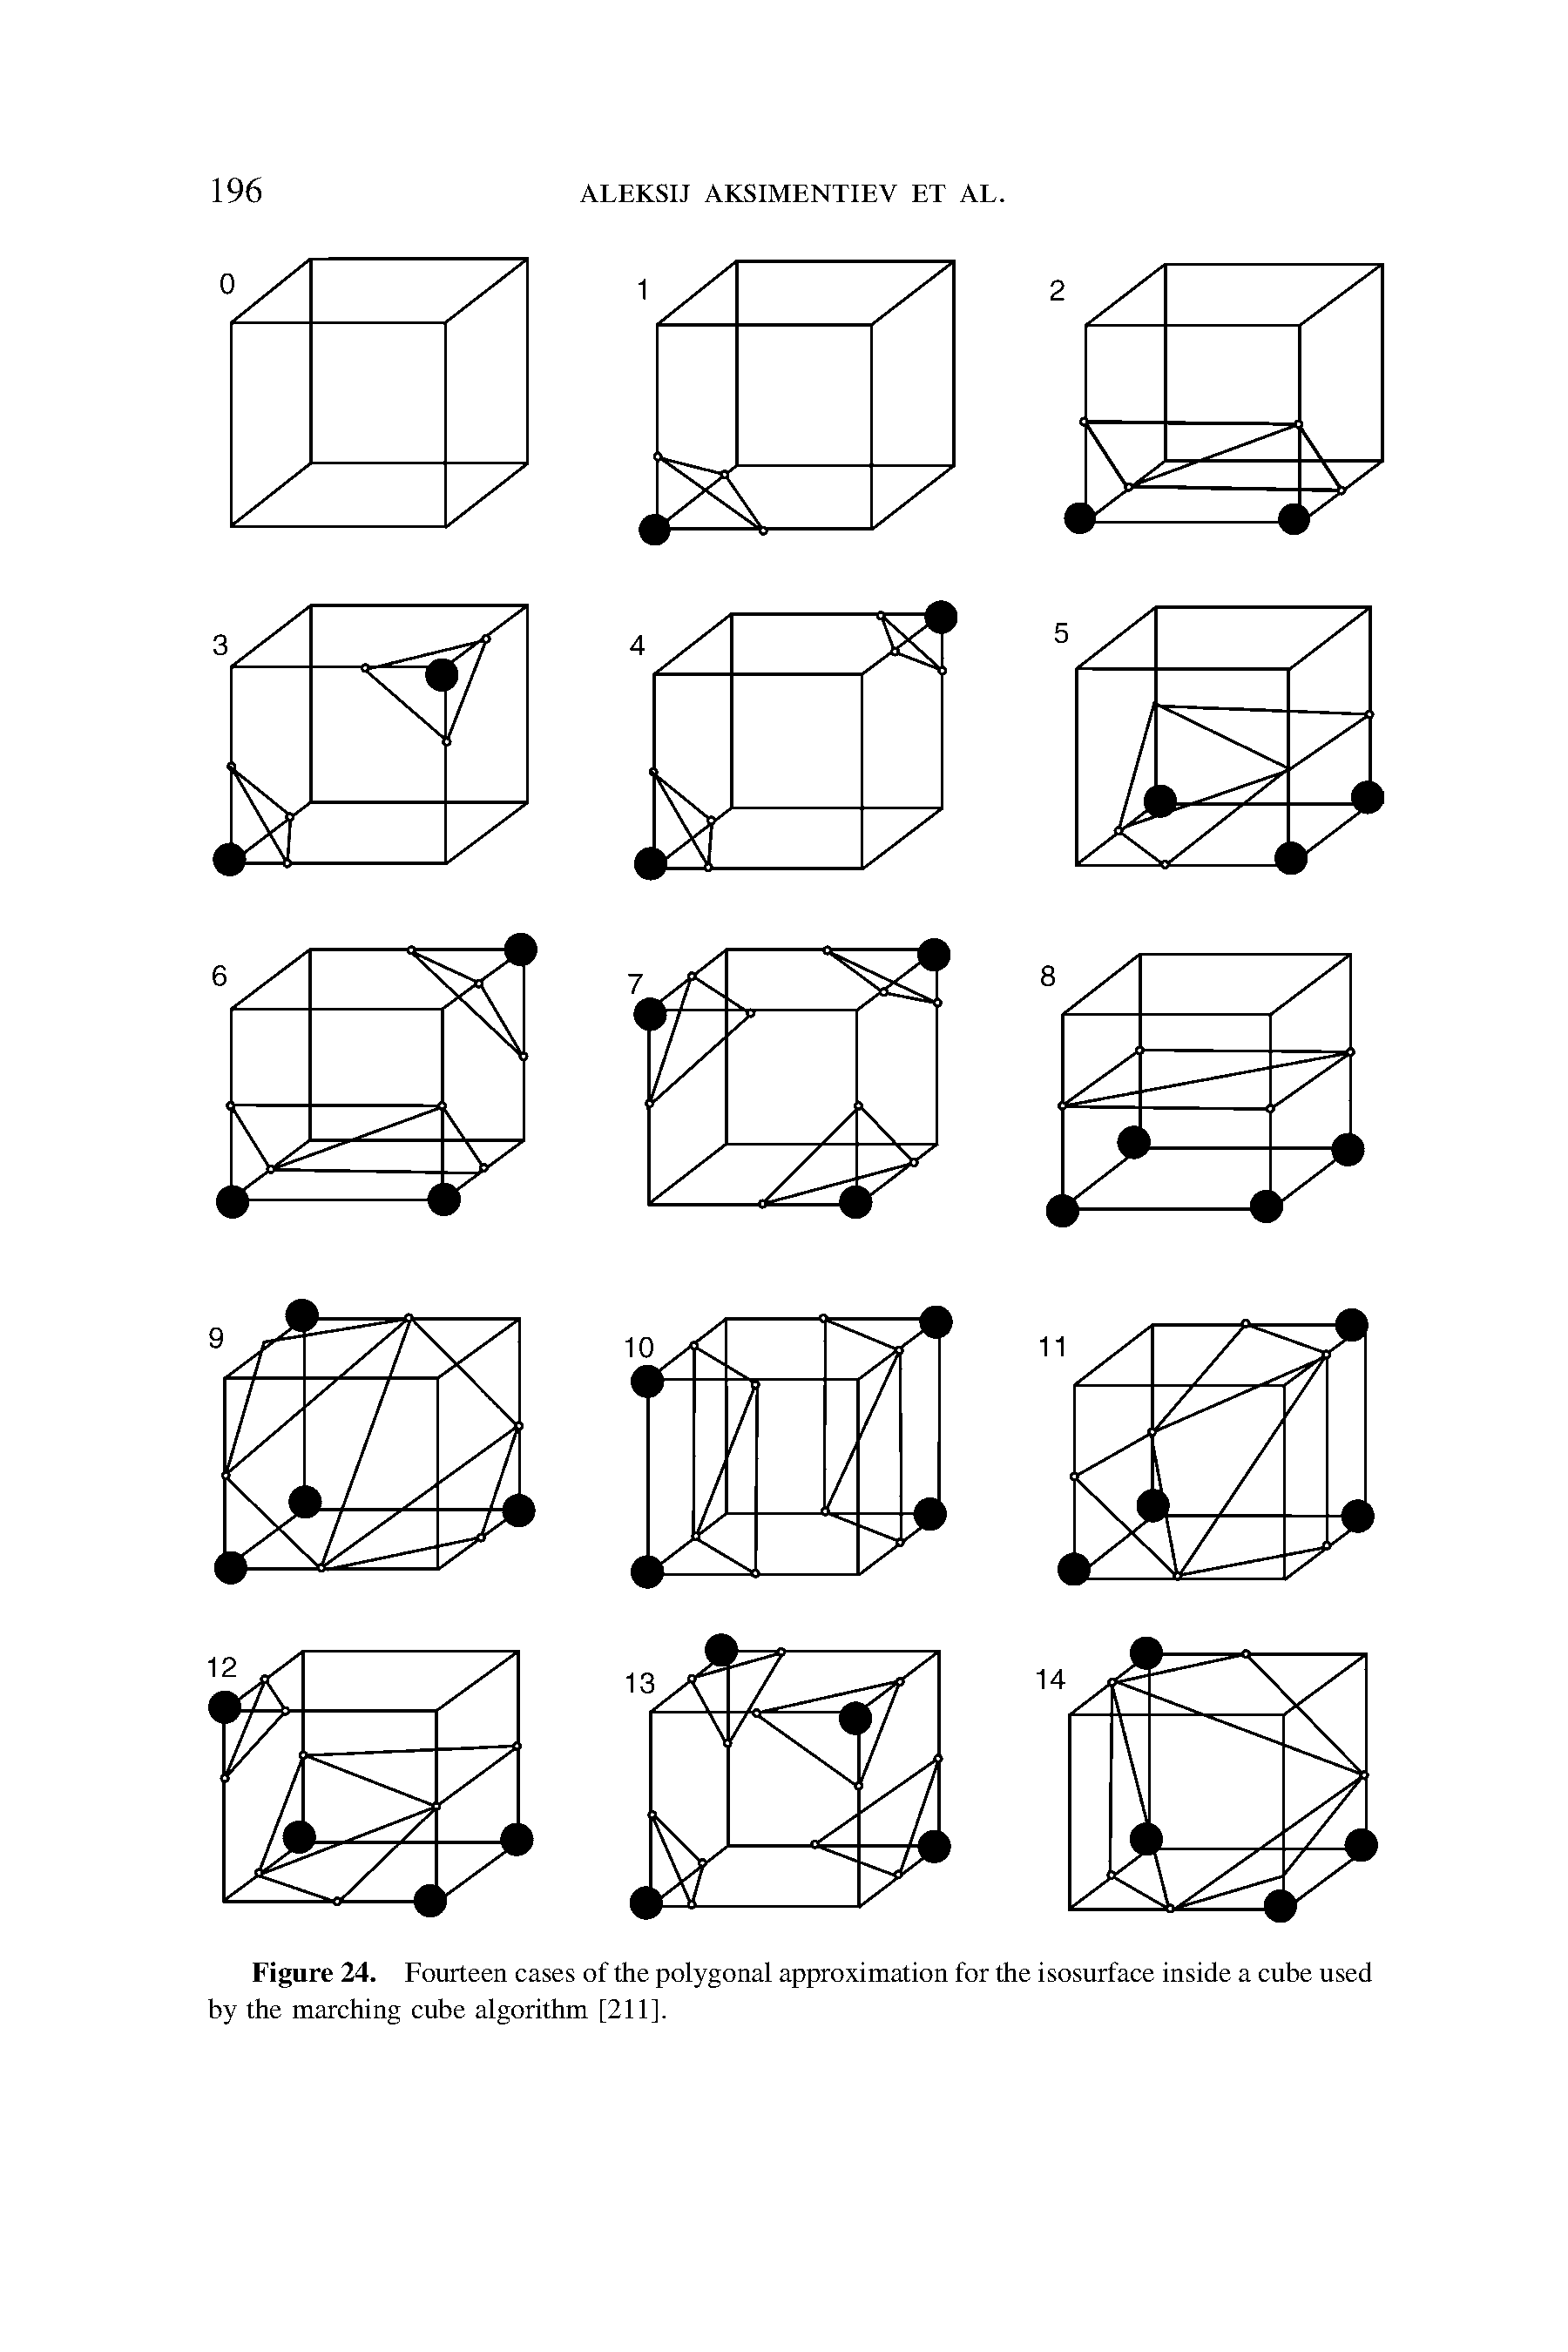 Figure 24. Fourteen cases of the polygonal approximation for the isosurface inside a cube used by the marching cube algorithm [211].